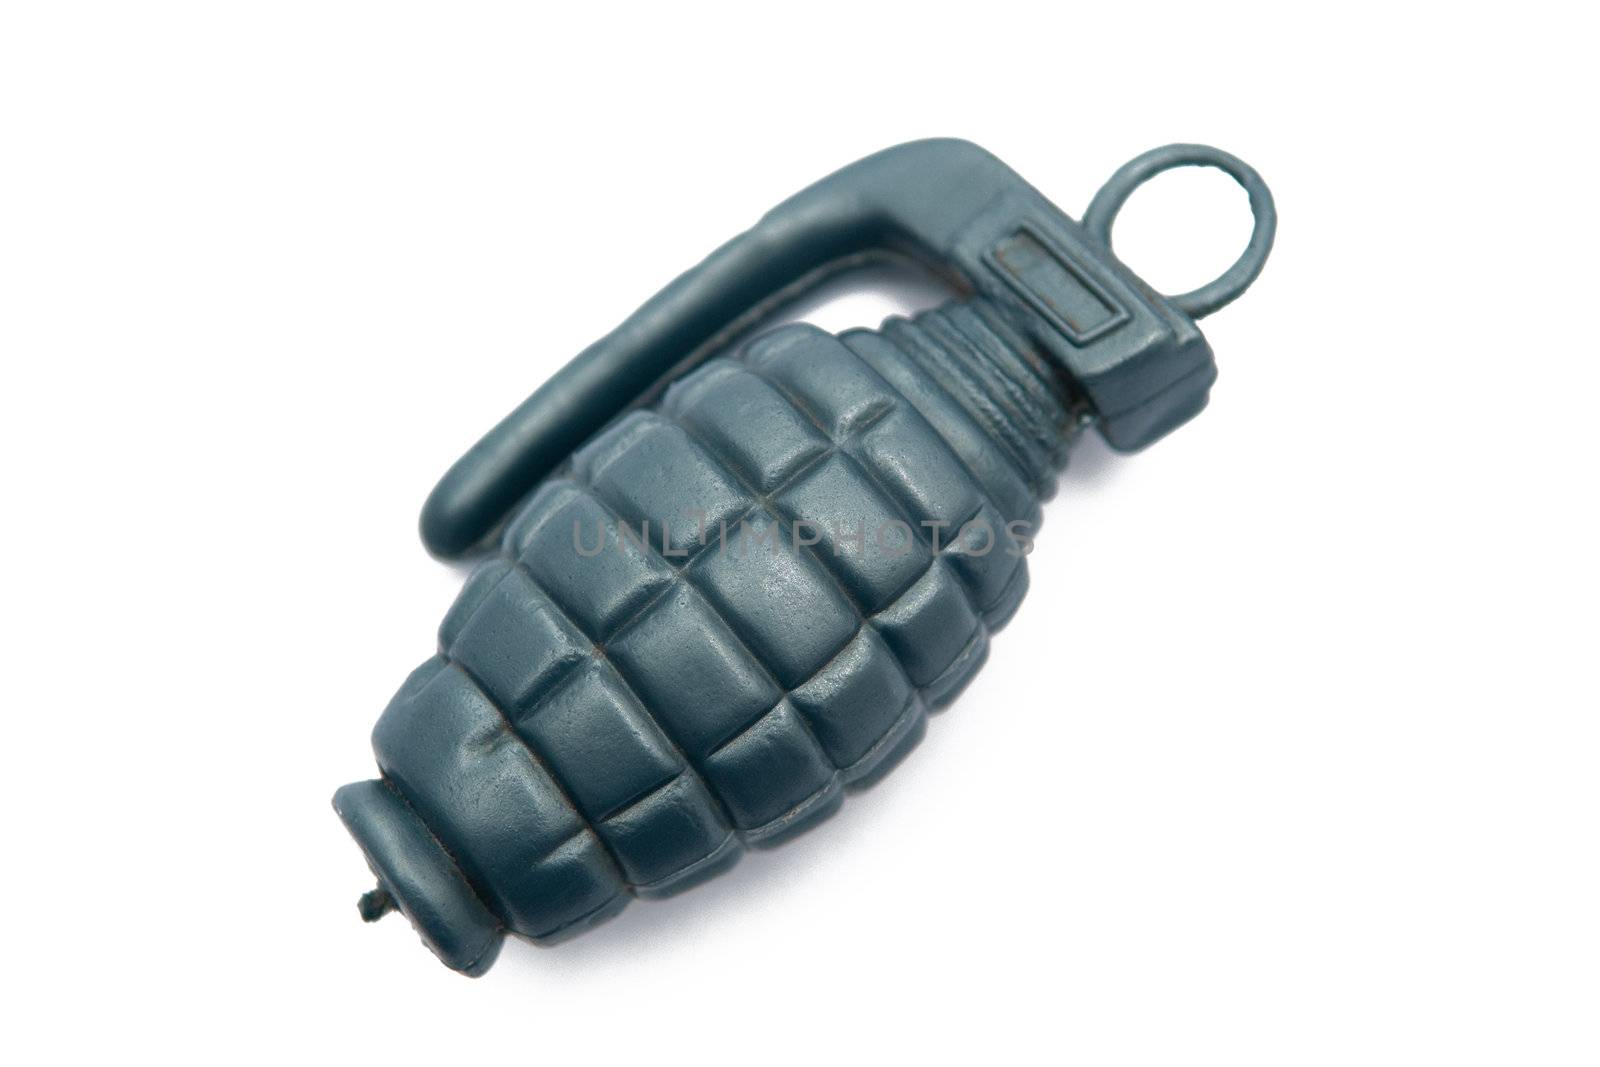 Grenade on the white background